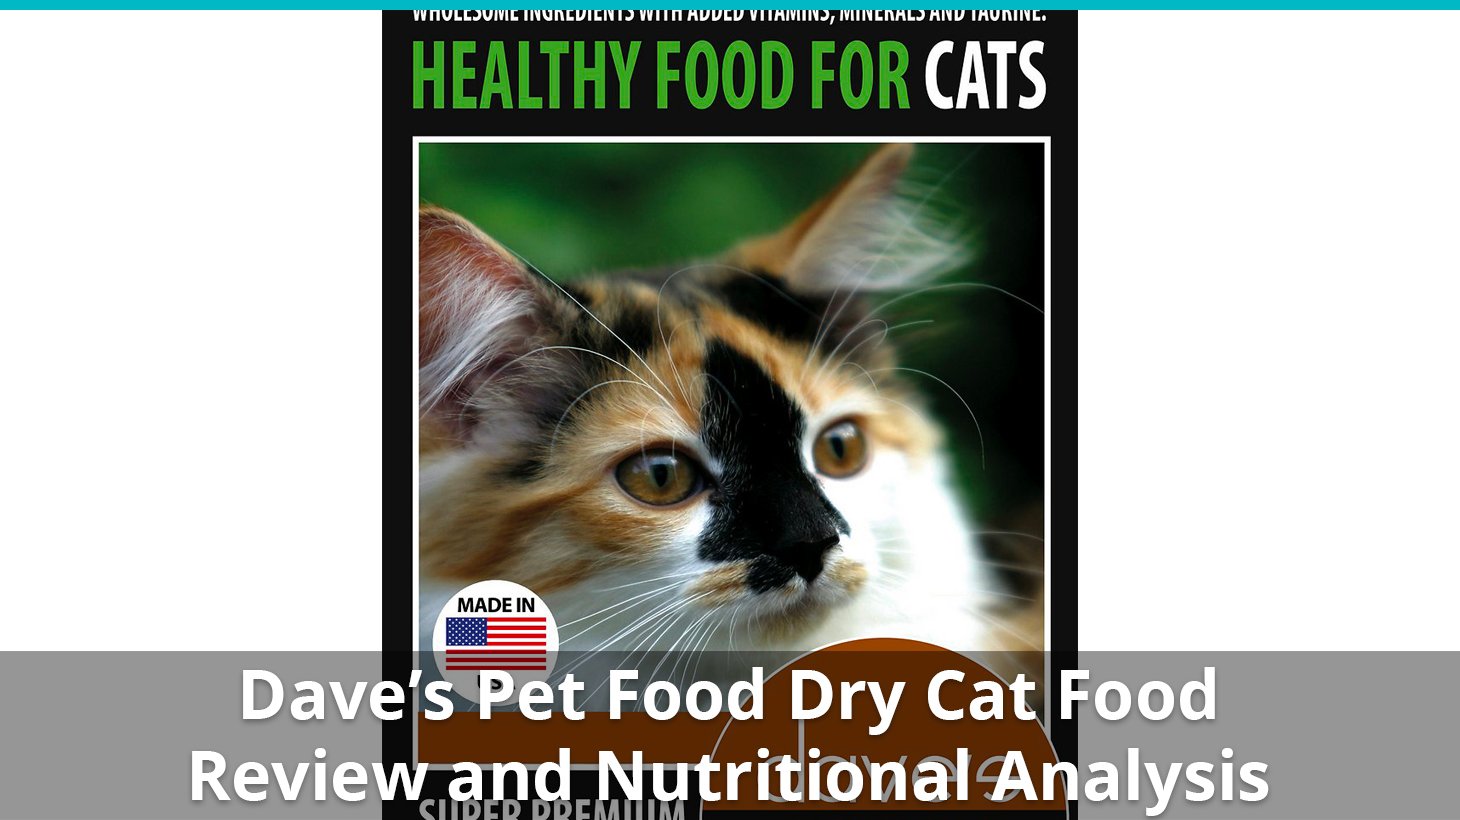 Dave's Pet Food Cat Food (Dry) Review And Analysis